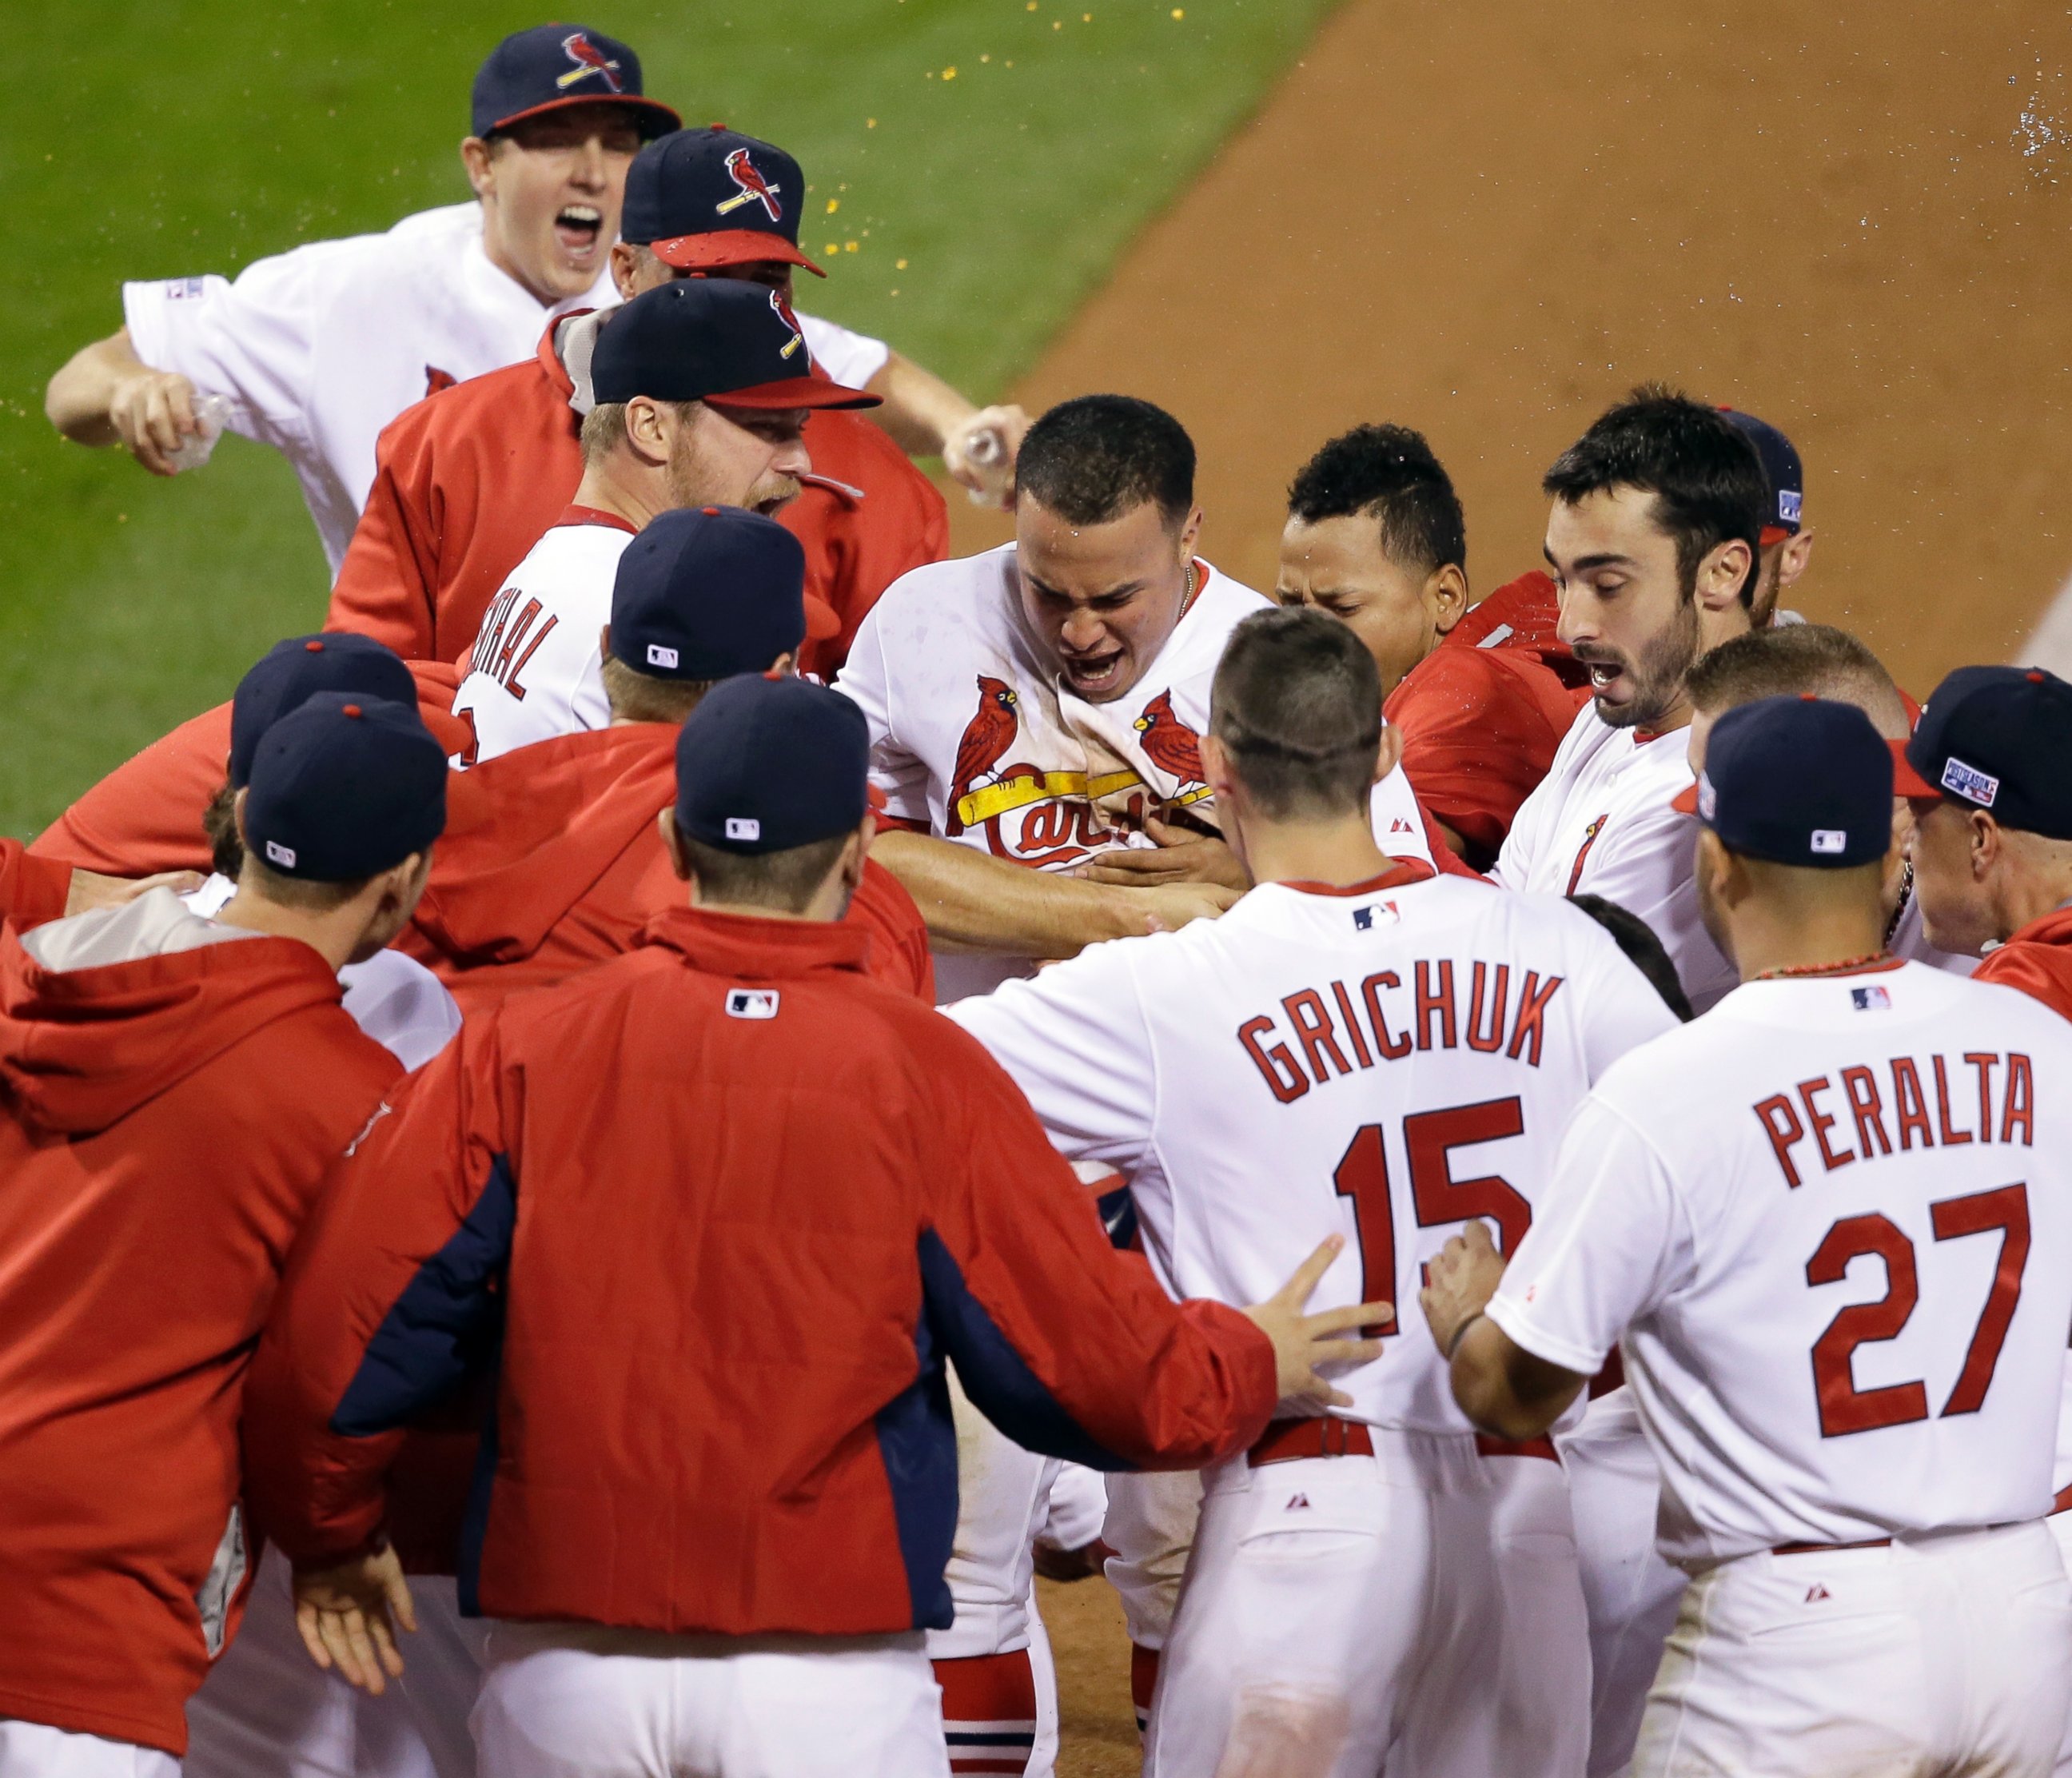 PHOTO: St. Louis Cardinals' Kolten Wong is congratulated after hitting a walk off home run during the ninth inning in Game 2 of the National League baseball championship series, Oct. 12, 2014, in St. Louis.